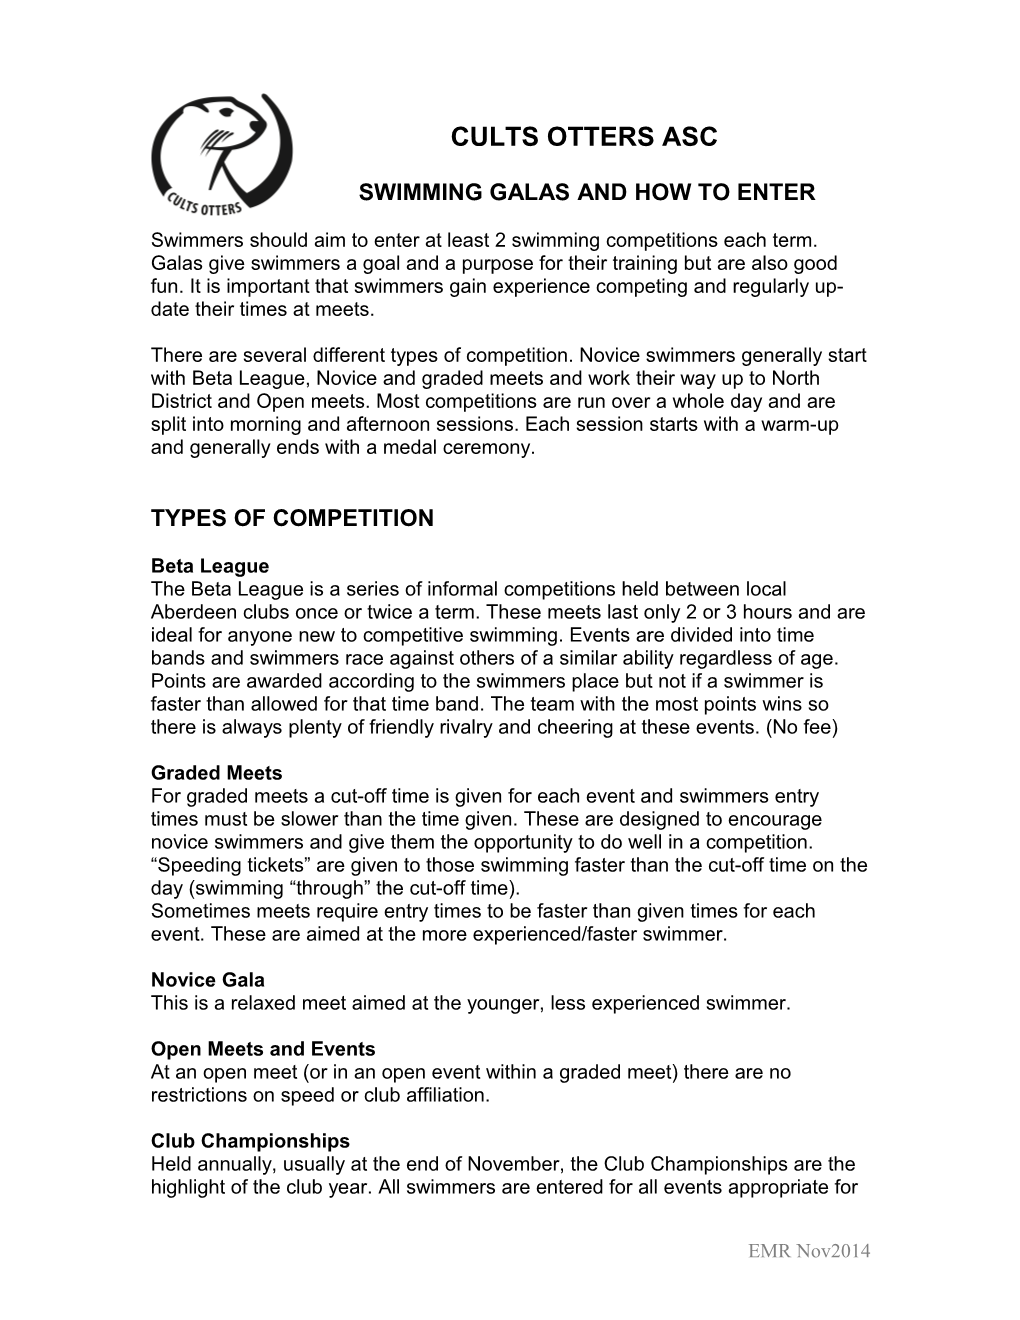 Swimming Galas and How to Enter